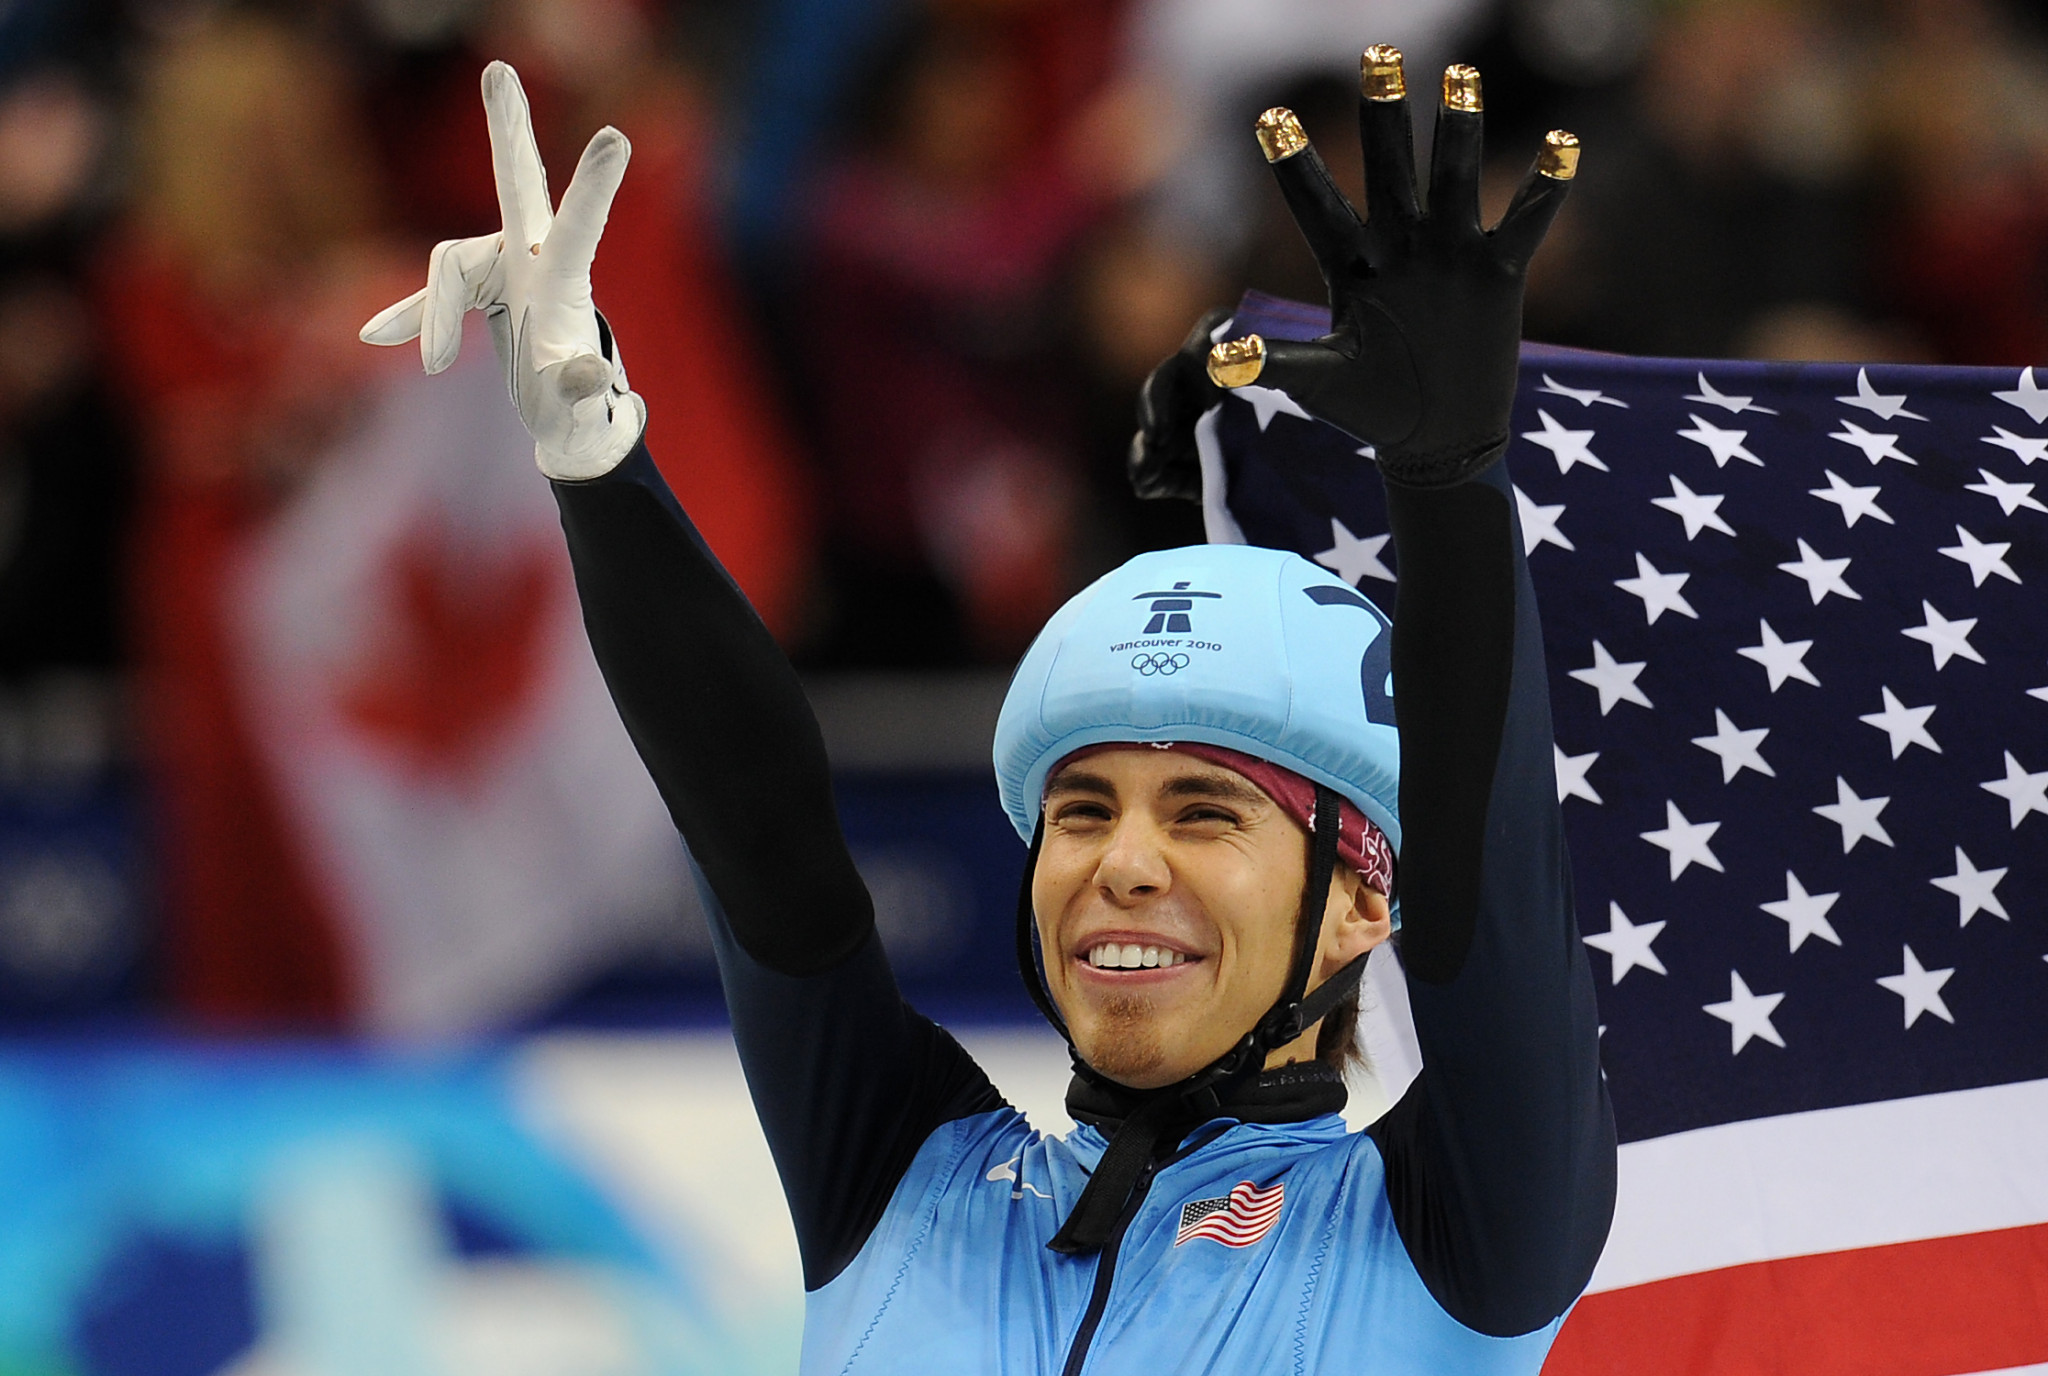 Apolo Ohno insists the United States must compete at Beijing regardless of political tensions ©Getty Images